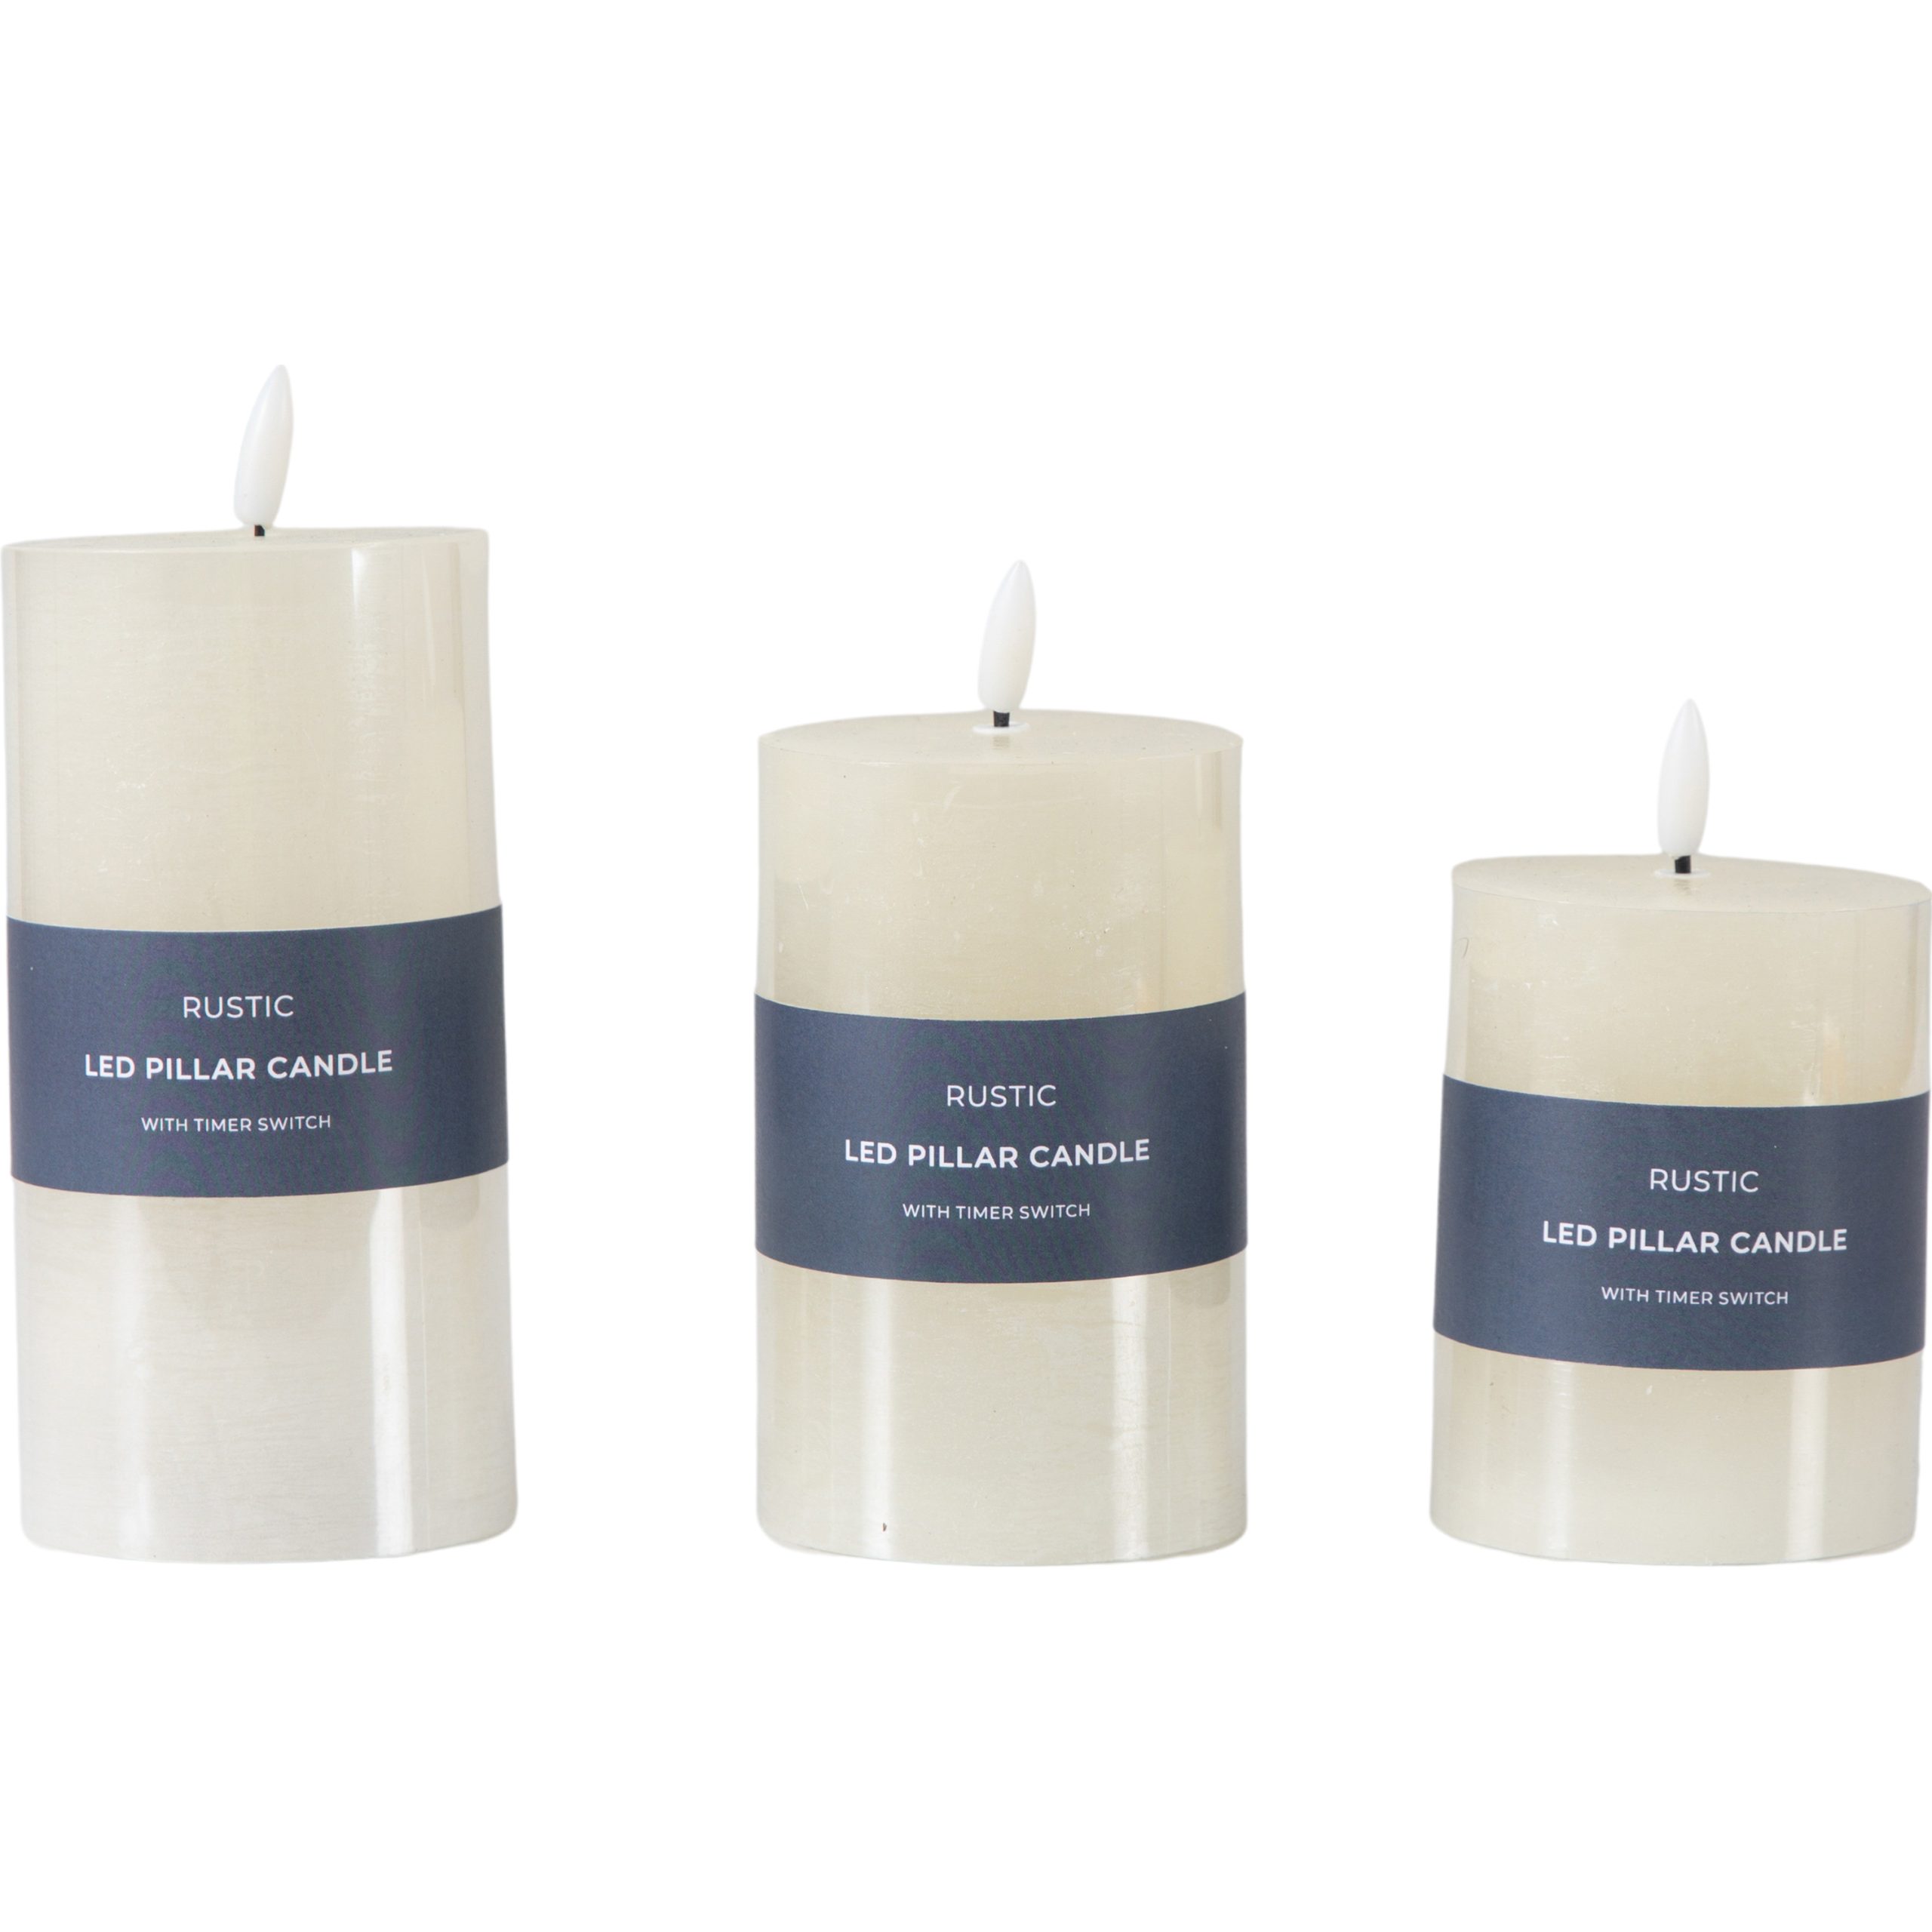 Gallery Direct LED Candle Rustic Ivory (Set of 3)